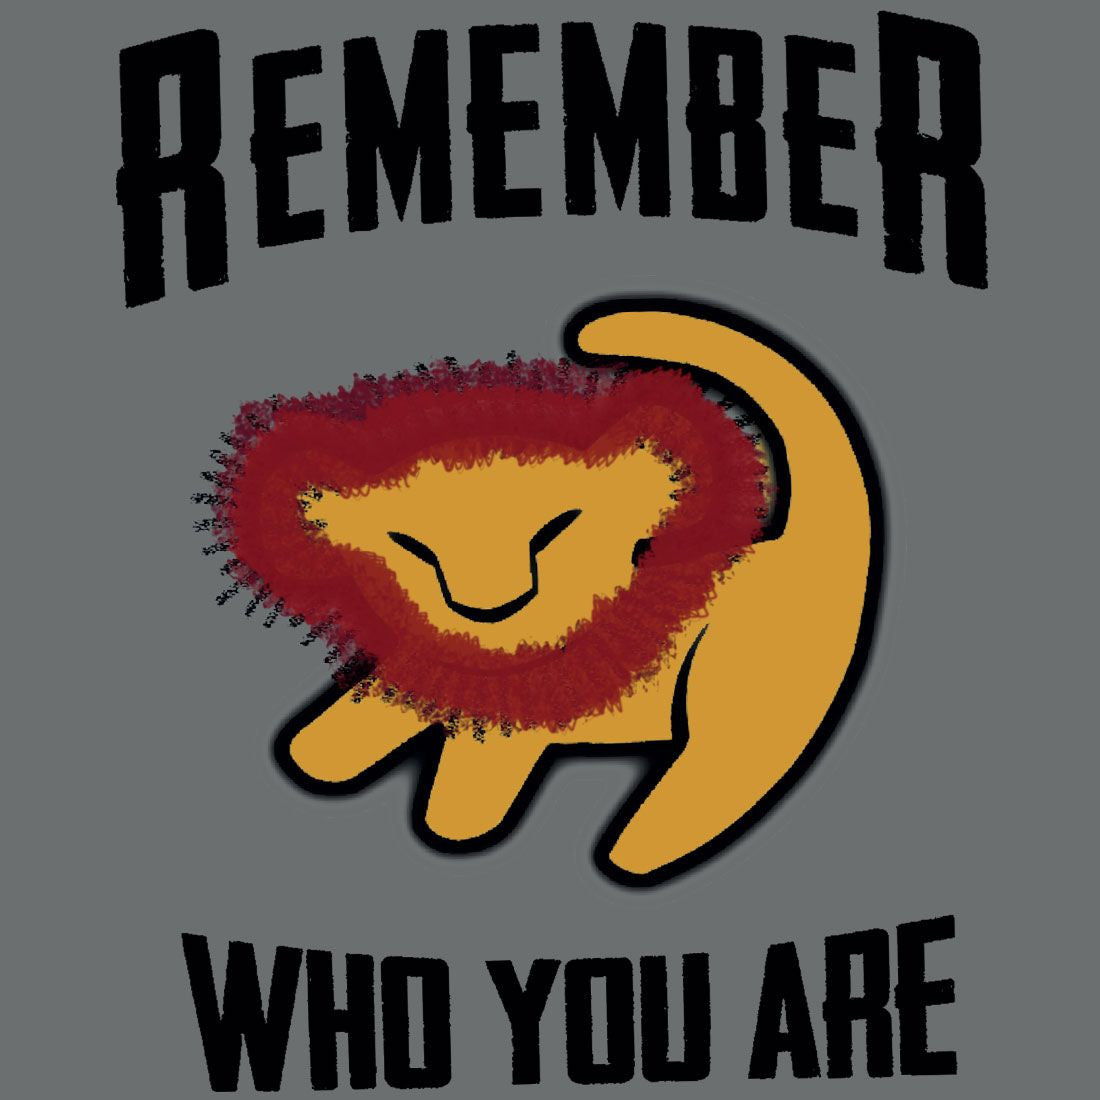 Disney Women's T-shirt - The Lion King - Remember Who You Are